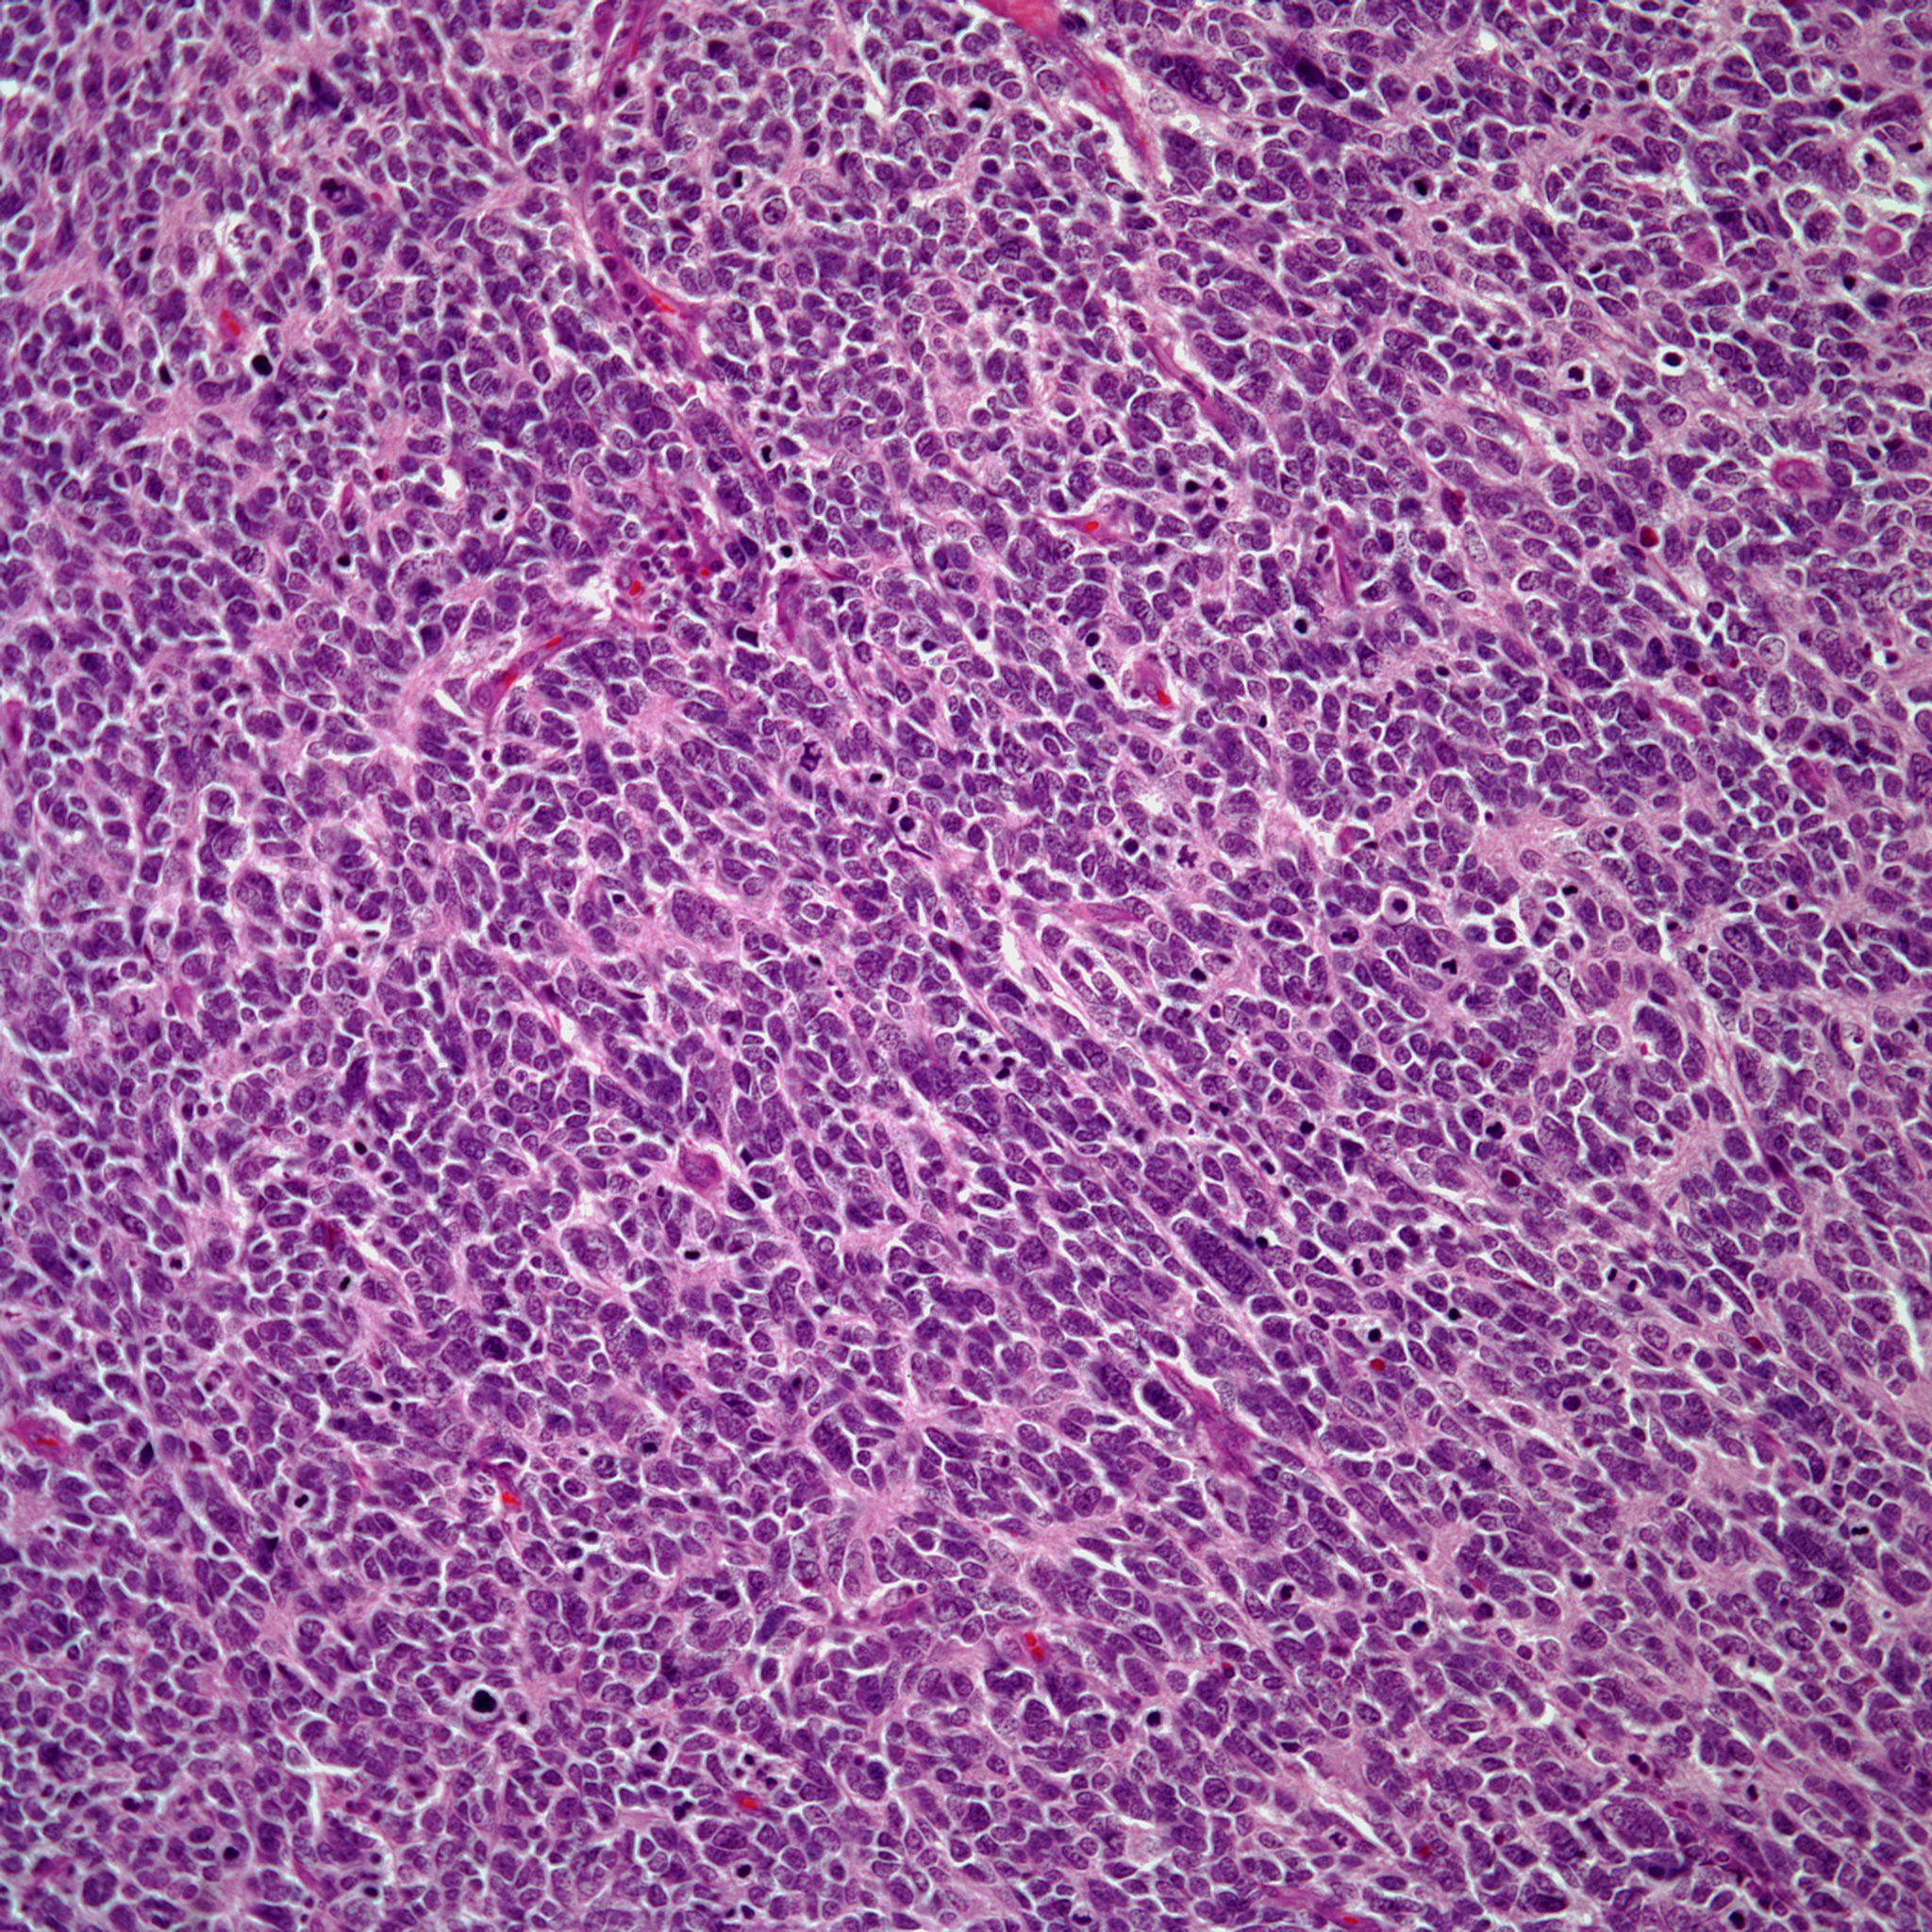 A 43-Year-Old Male With a Soft Tissue Mass